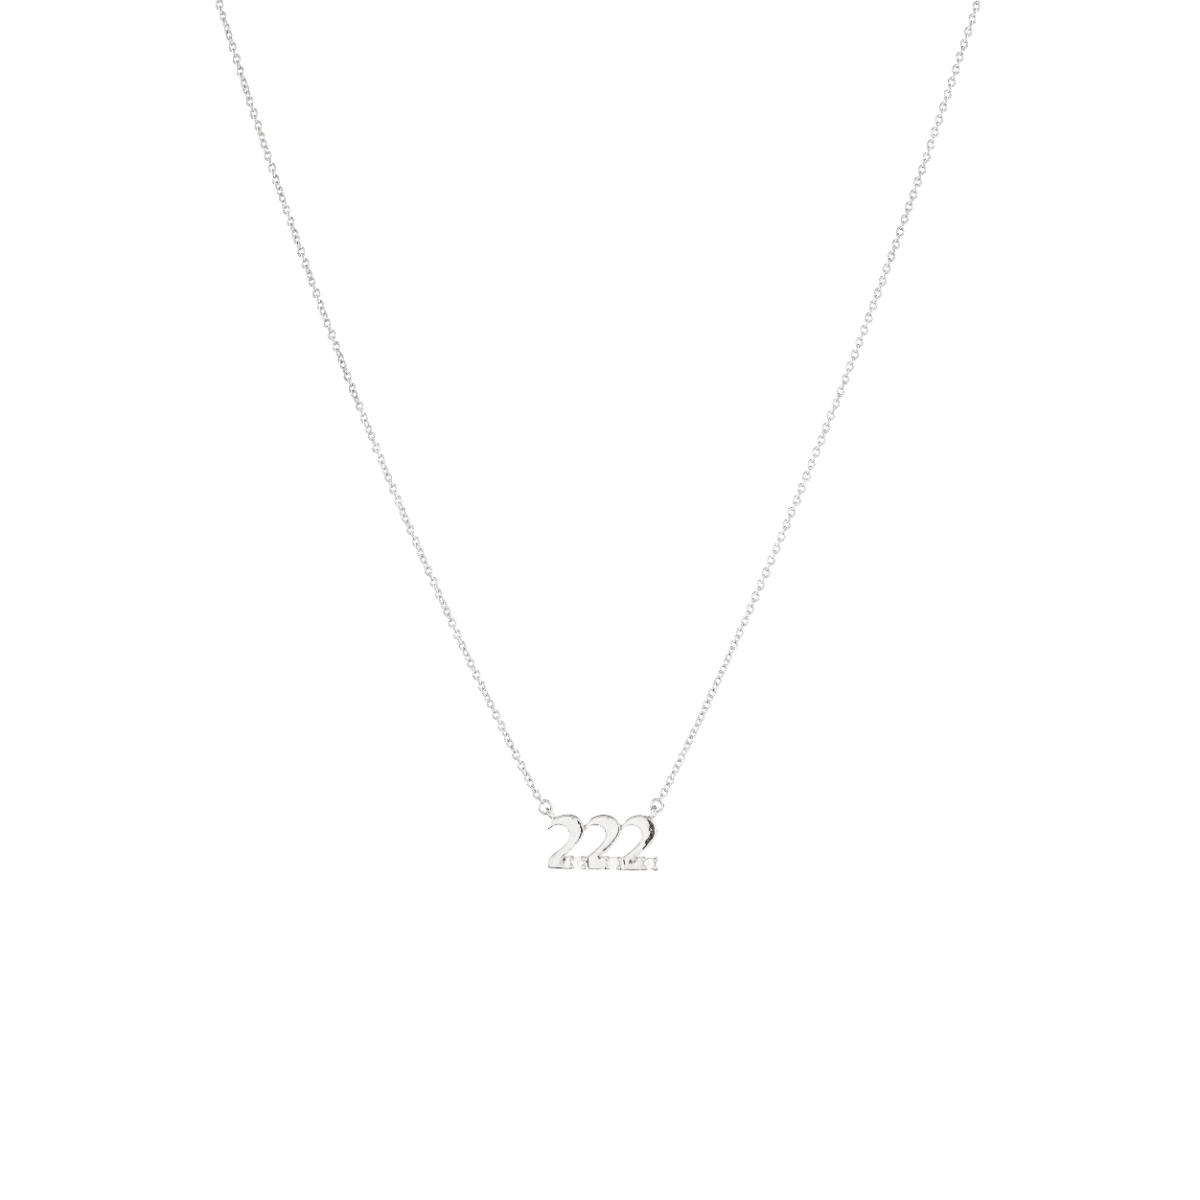 222 - Alignment Necklace